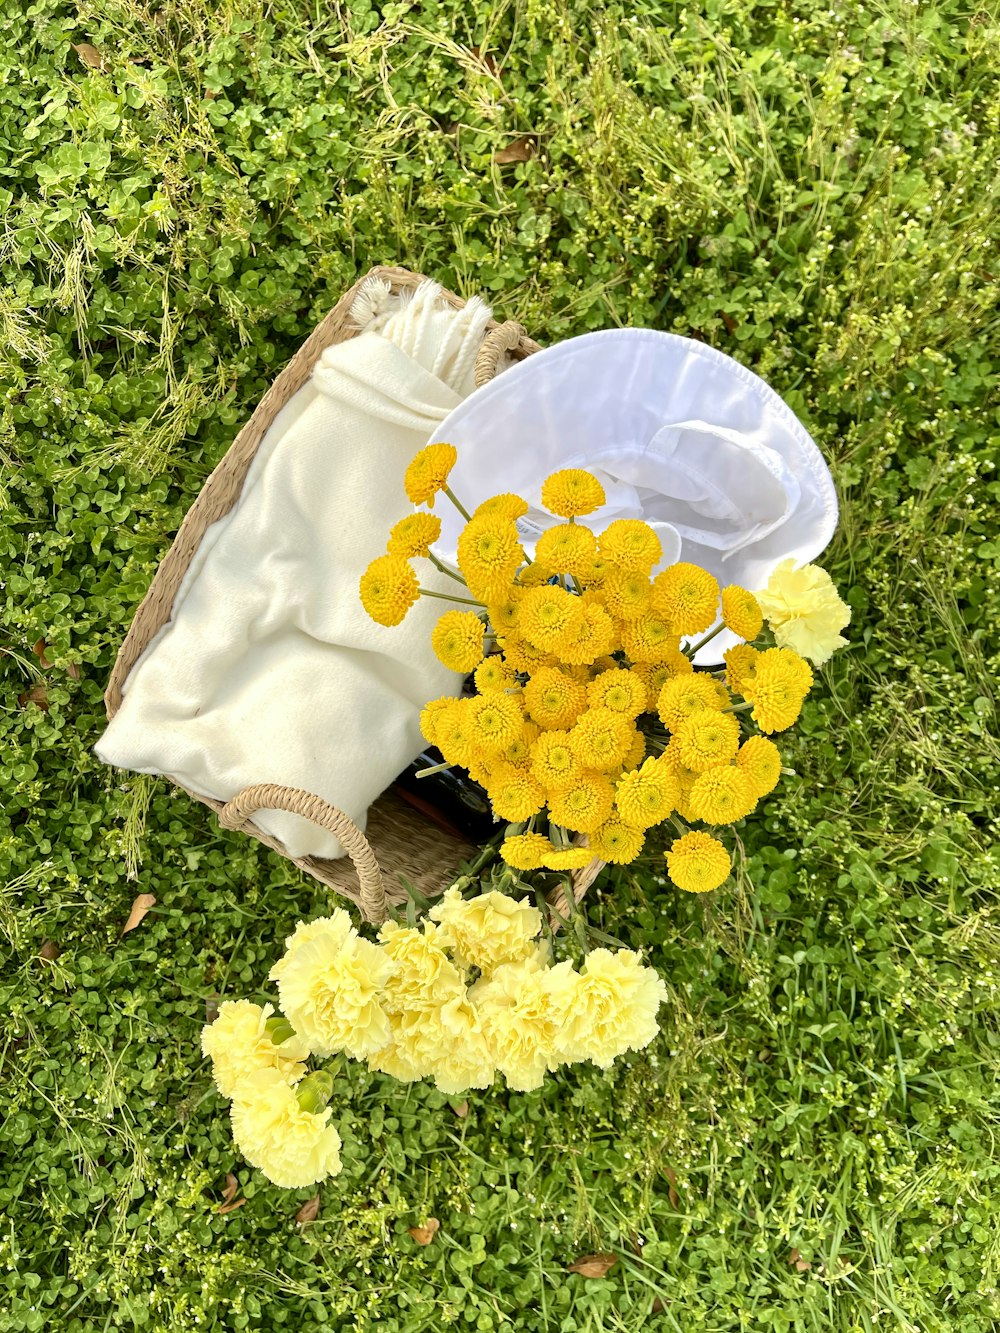 yellow flowers on brown leather bag on green grass field during daytime